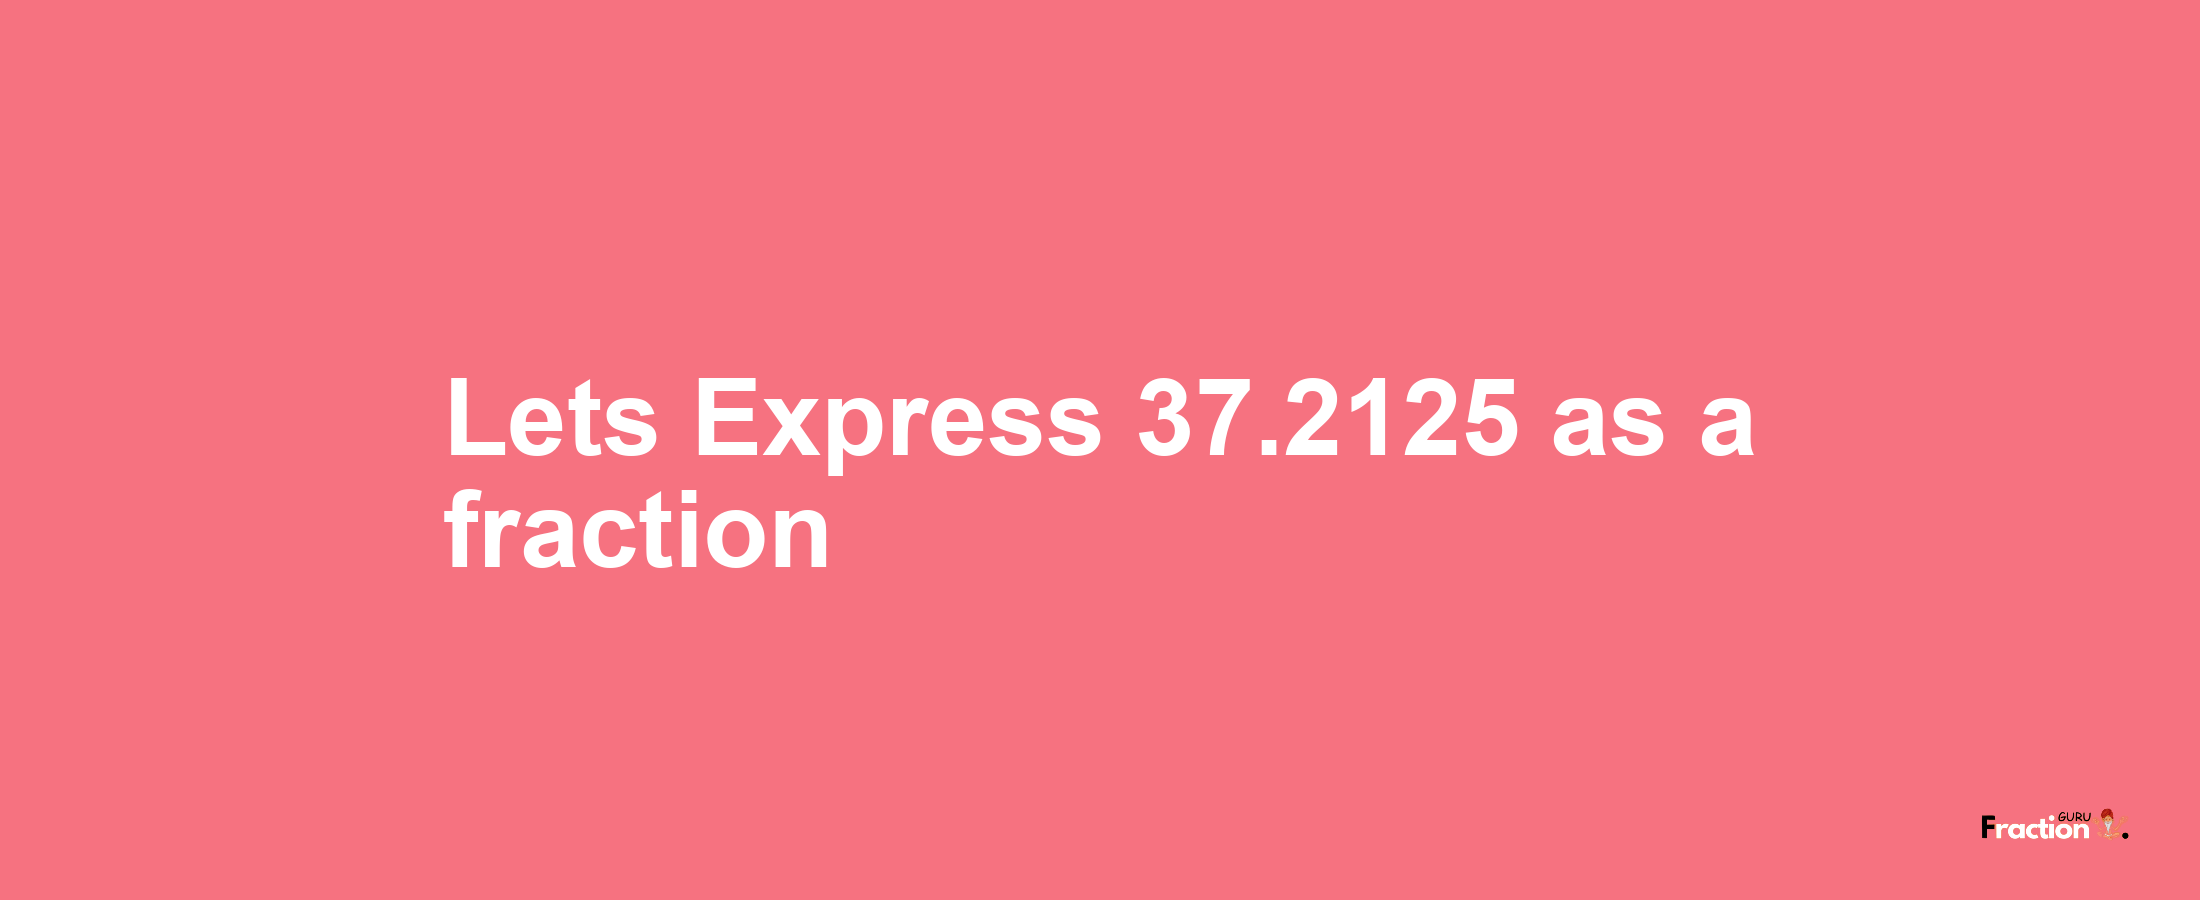 Lets Express 37.2125 as afraction